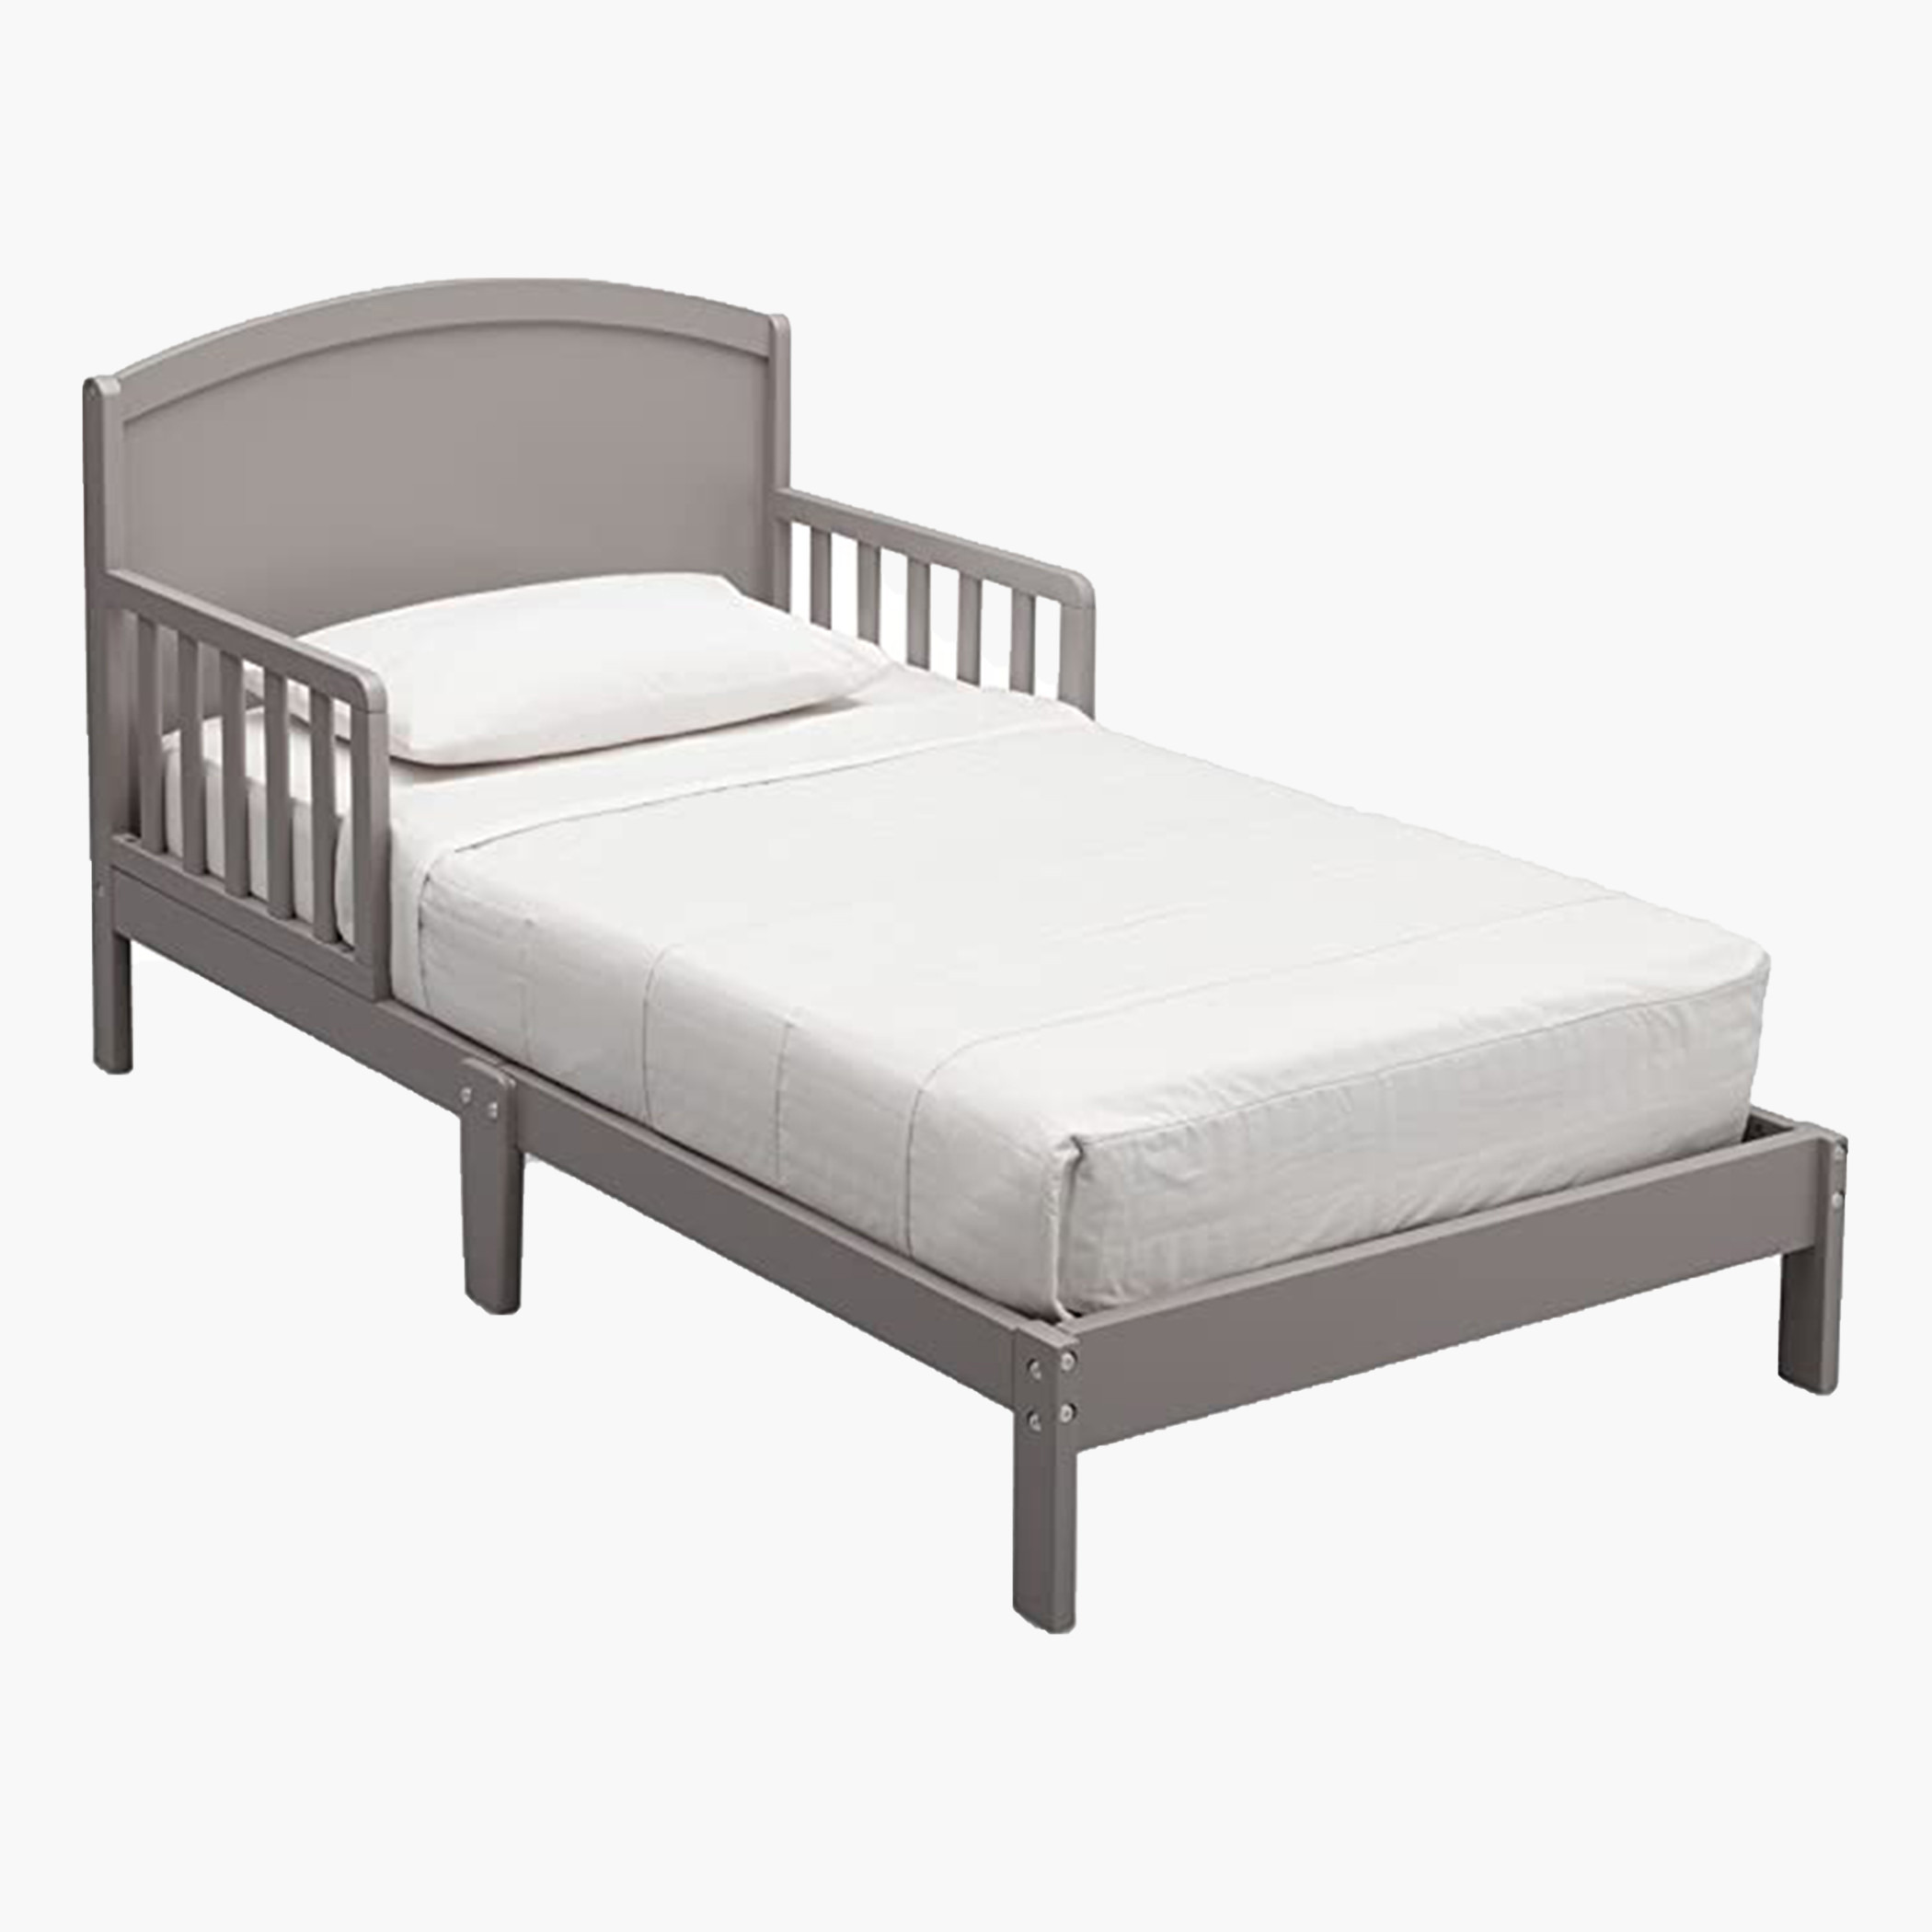 Buy Delta Abby Toddler Bed for Babies Online in Bahrain Centrepoint